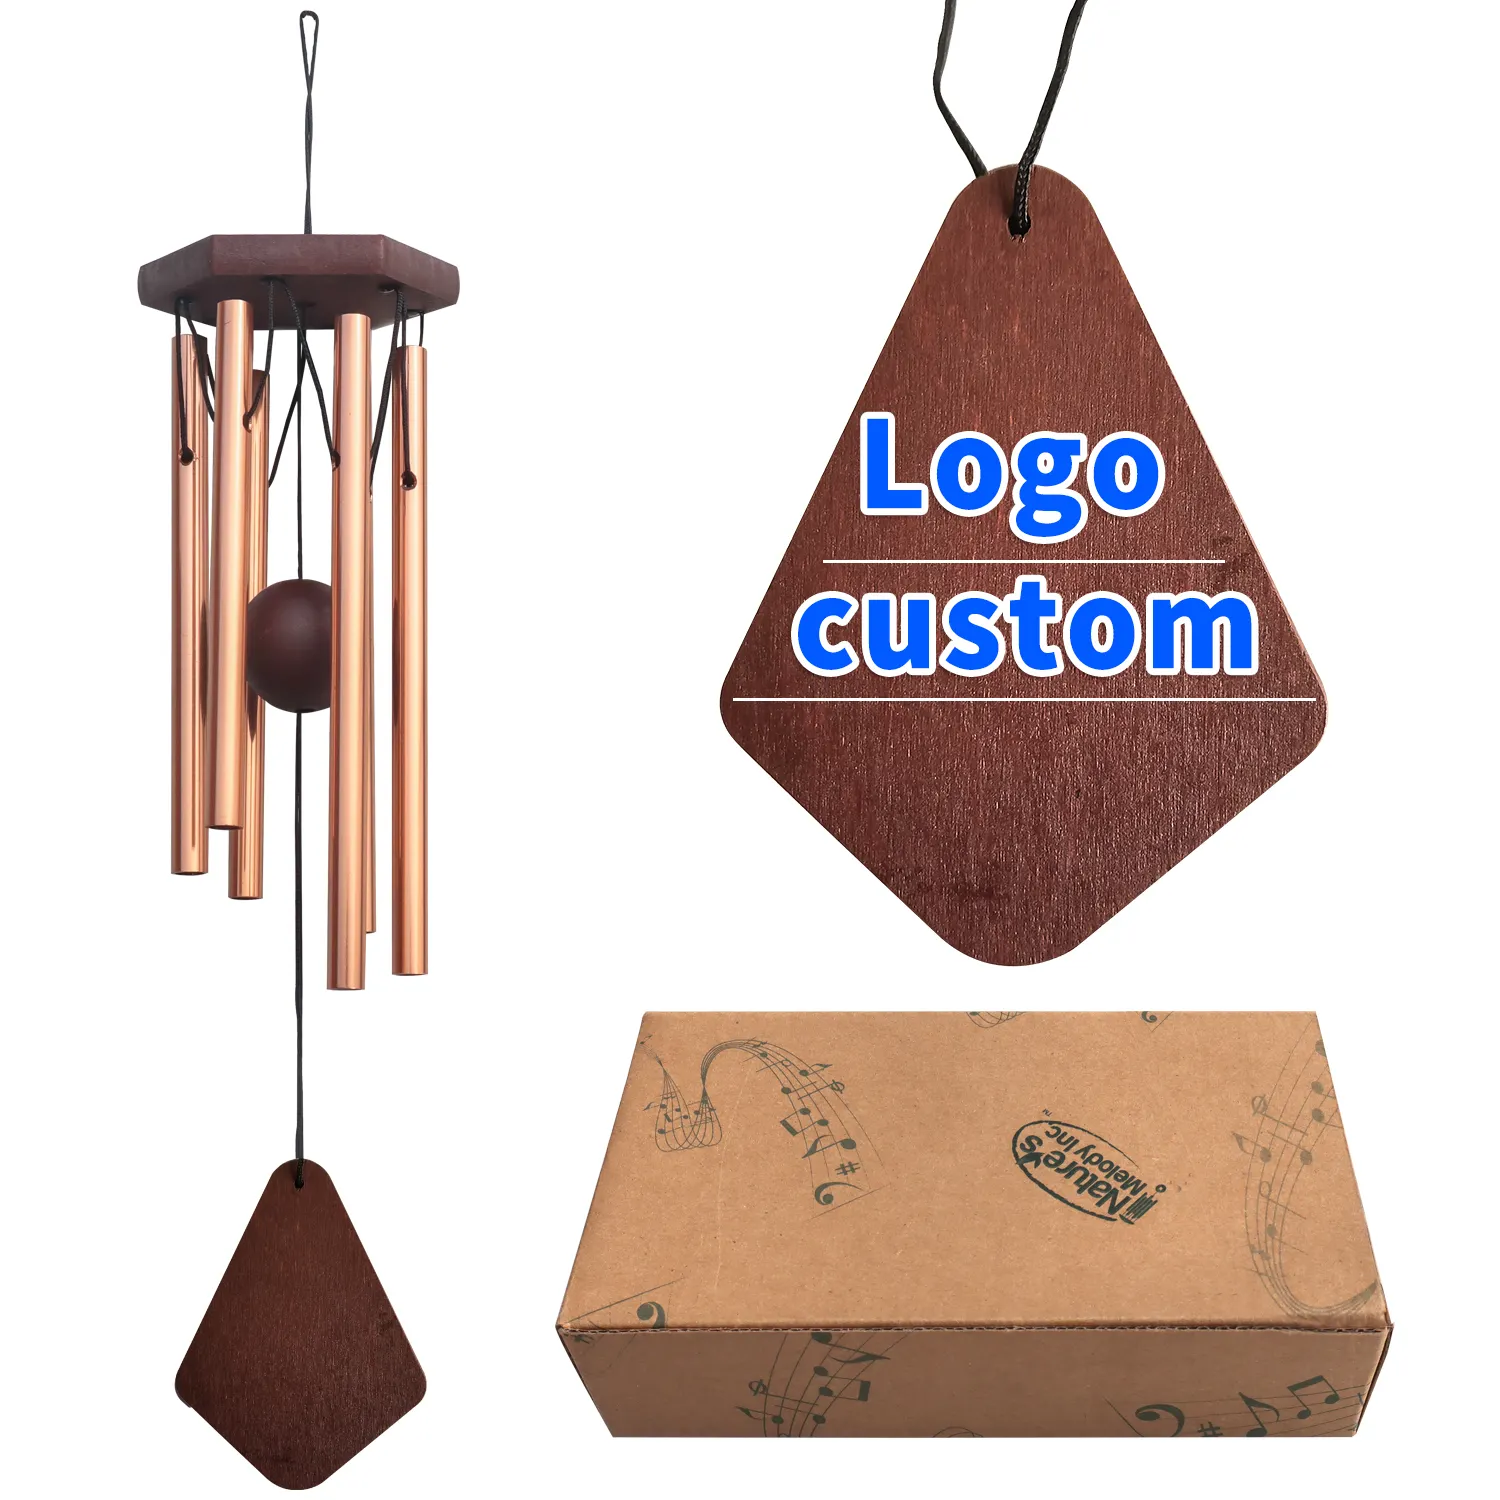 OEM customized memorial commemorative wind chimes factory wholesale aluminum tube wooden sympathy wind chimes souvenir gifts